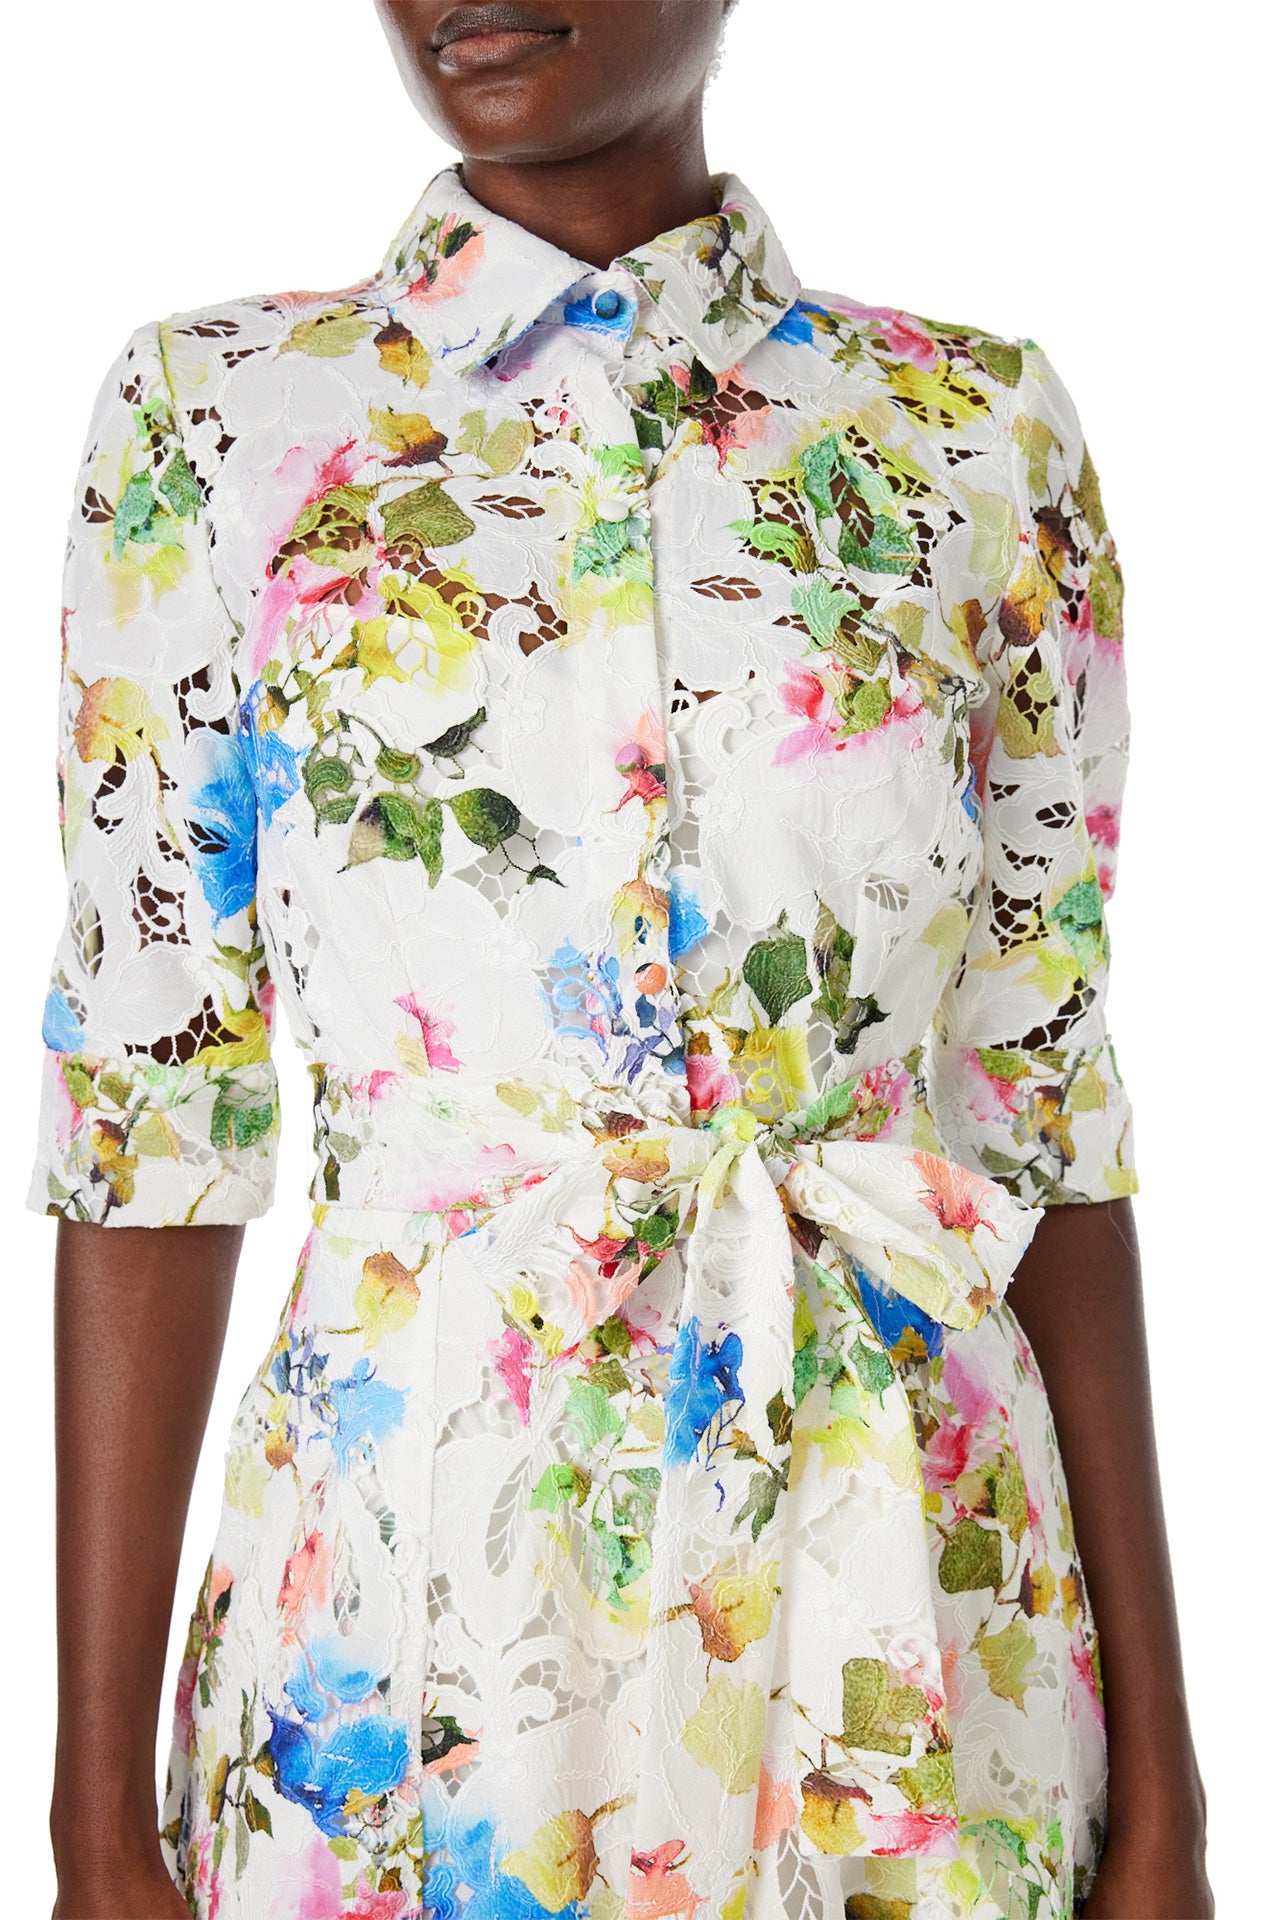 Monique Lhuillier Spring 2024 silk white floral printed lace shirt dress with pockets and a scalloped hem - self tie belt.